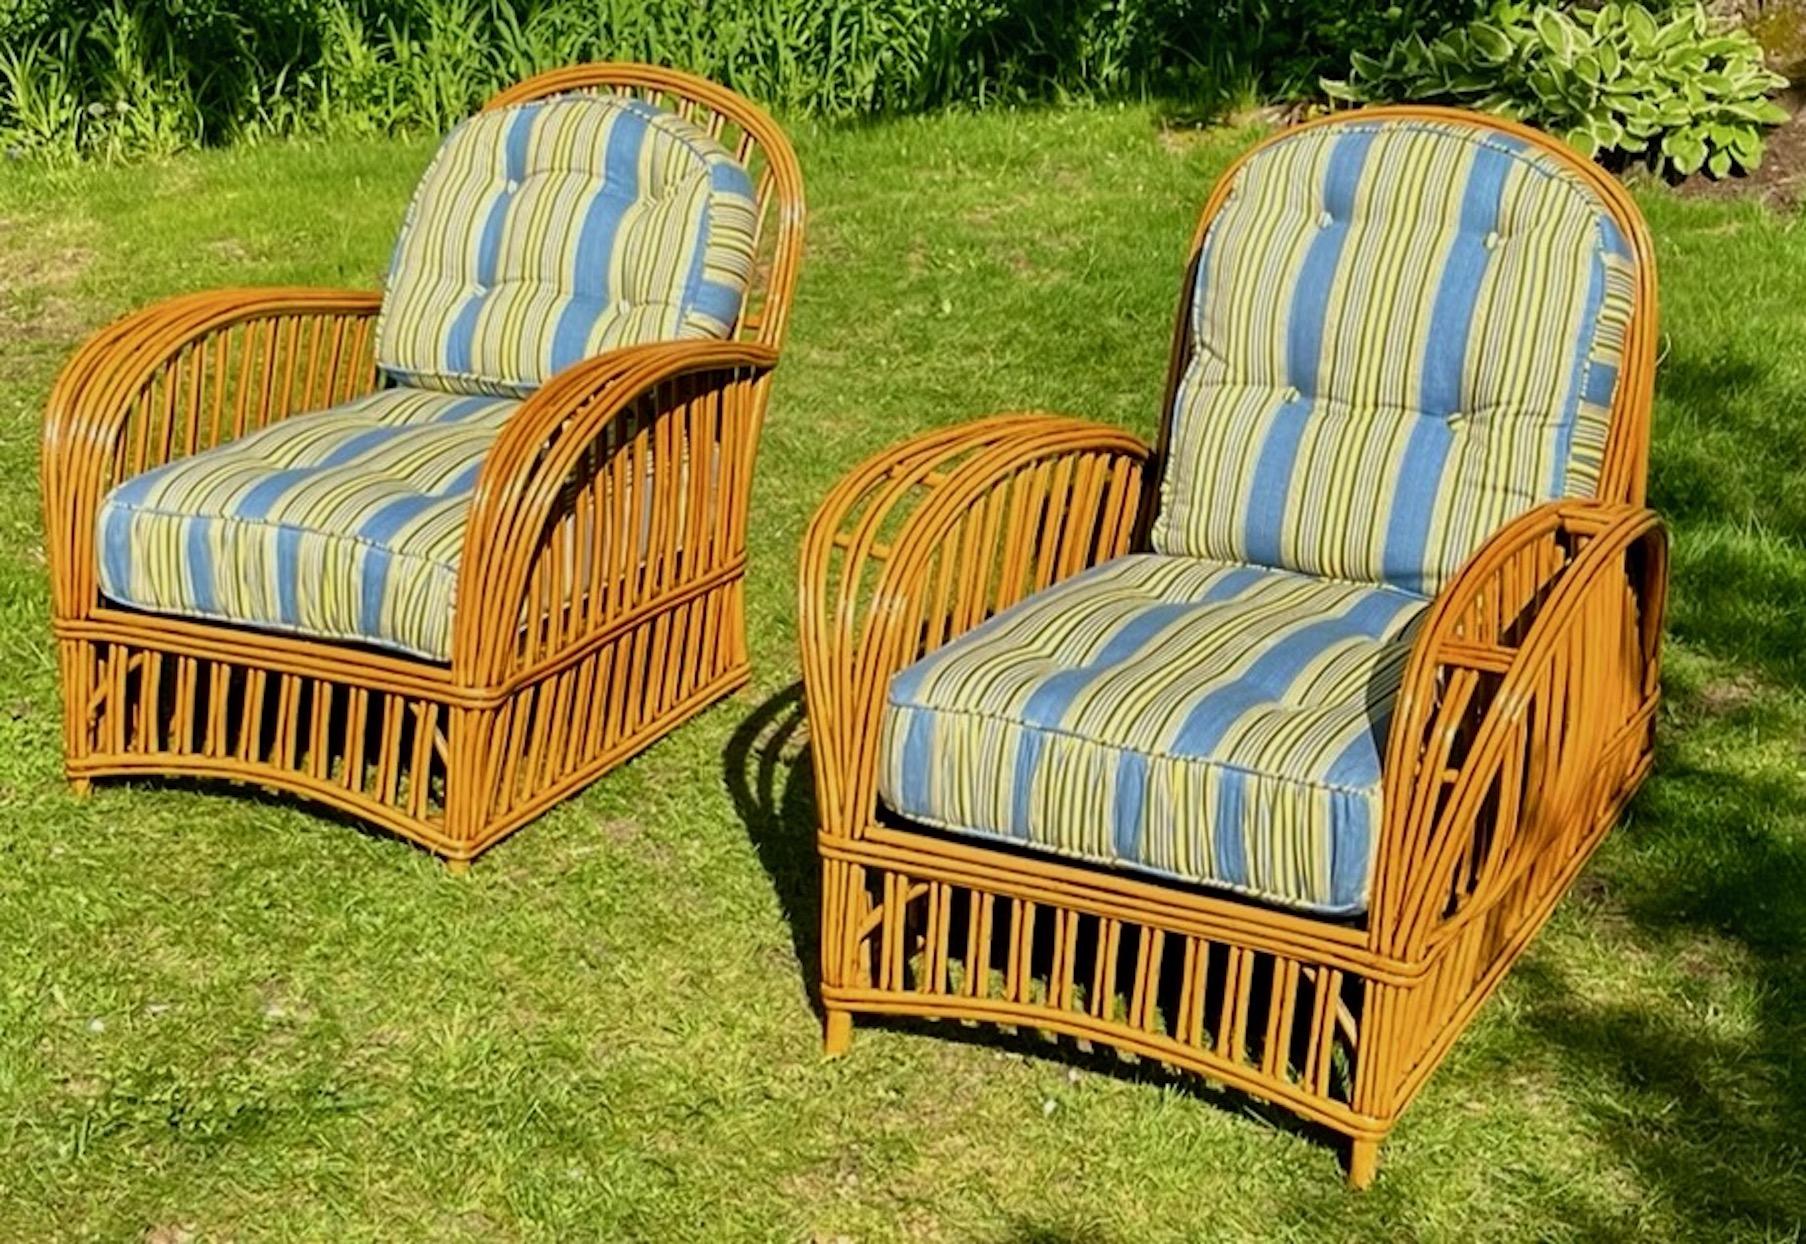 A Rare pair of Art Deco Rattan Arm Chairs, American, circa 1929 by the Heywood Wakefield Co,Gardner, Ma.These rattan chairs are also known as stick wicker and described as modernistic in their 1929 Heywood Wakefield Furniture catalogue. These